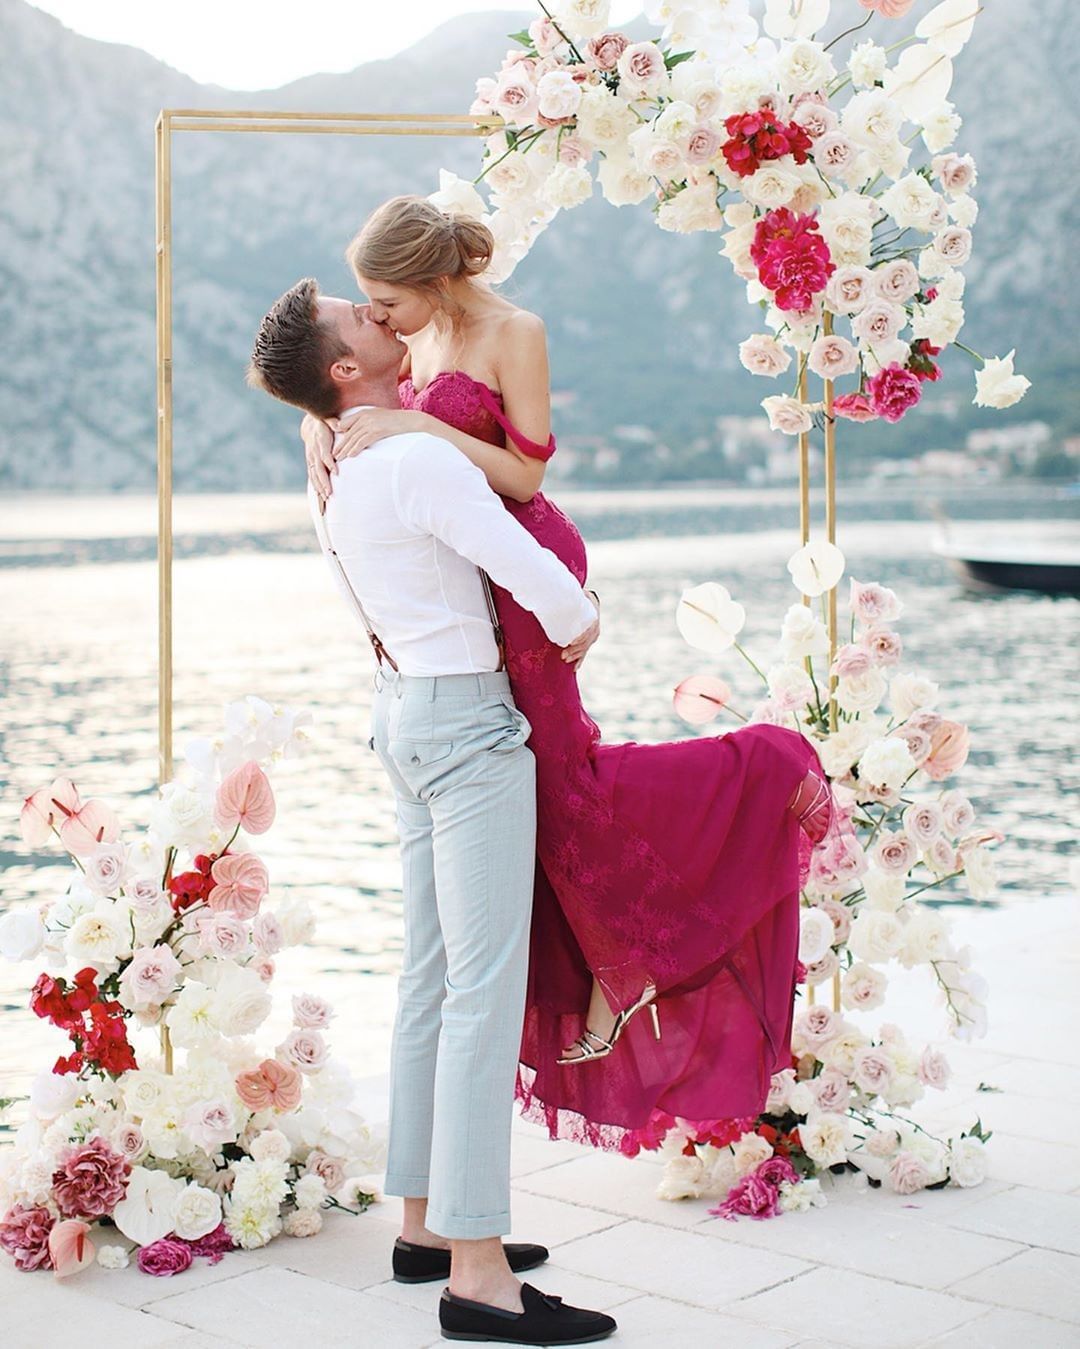 pink wedding dress for a lakeside wedding ceremony with a modern gold and fresh flower backdrop